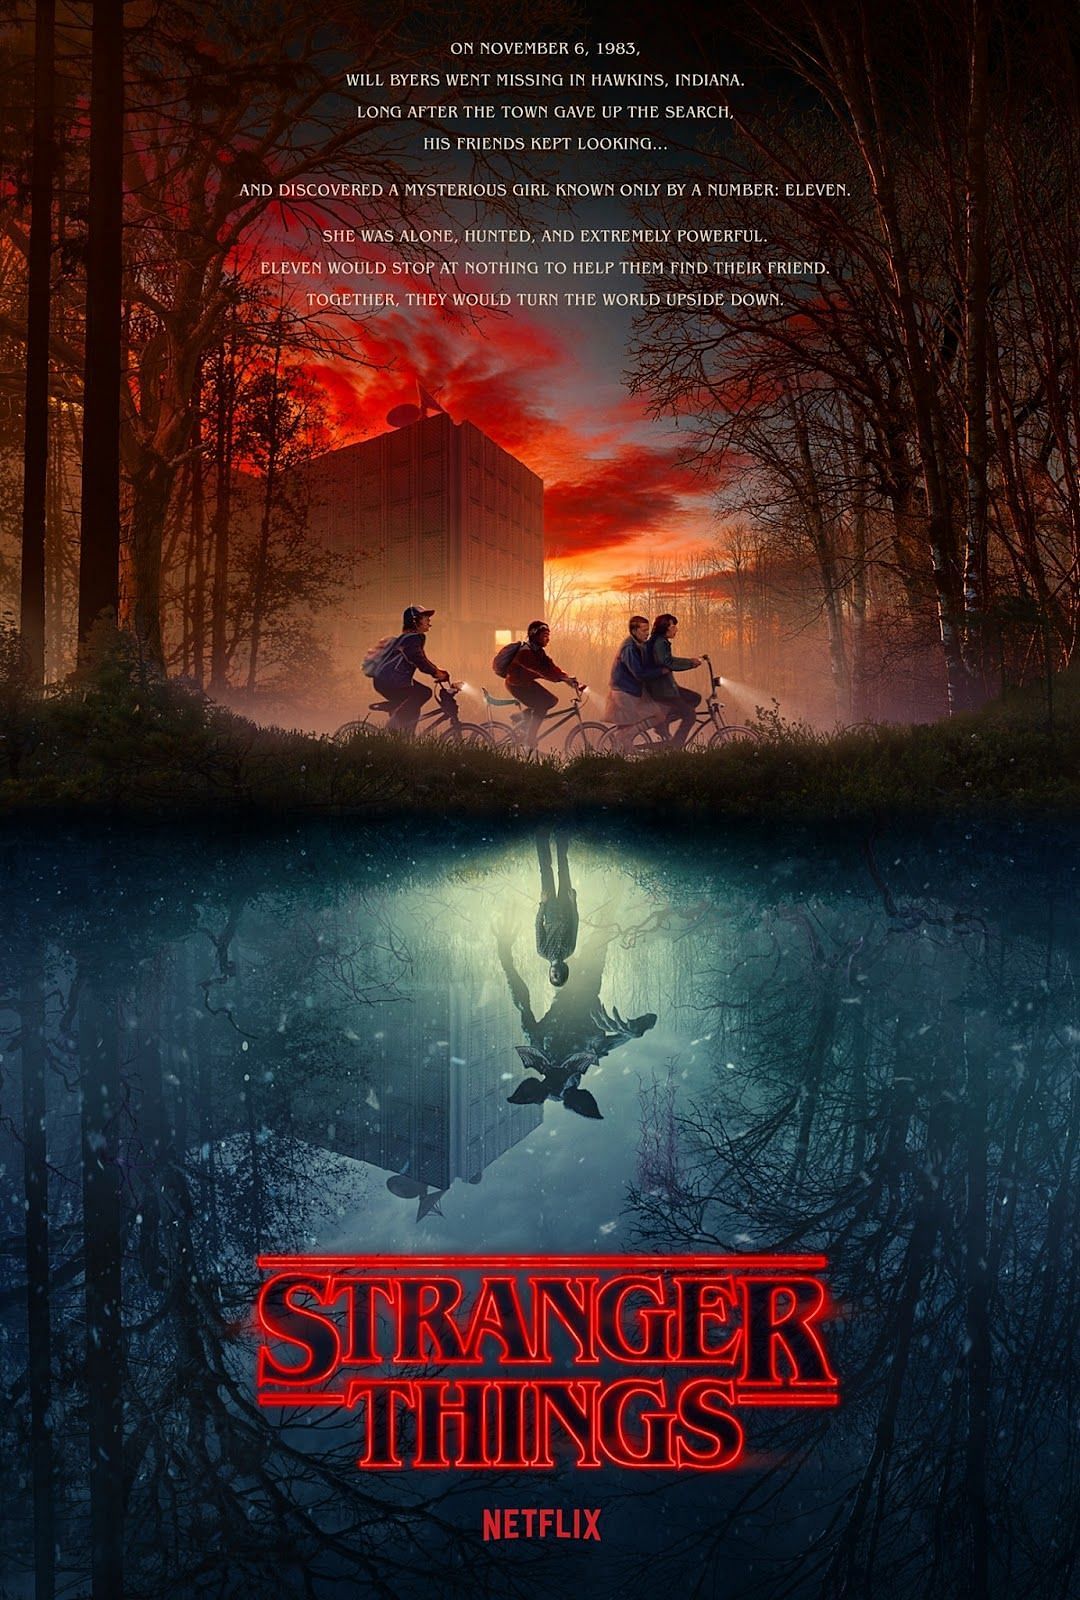 Is Stranger Things Based On A True Story? How MKUltra & Project Montauk  Influenced The Show